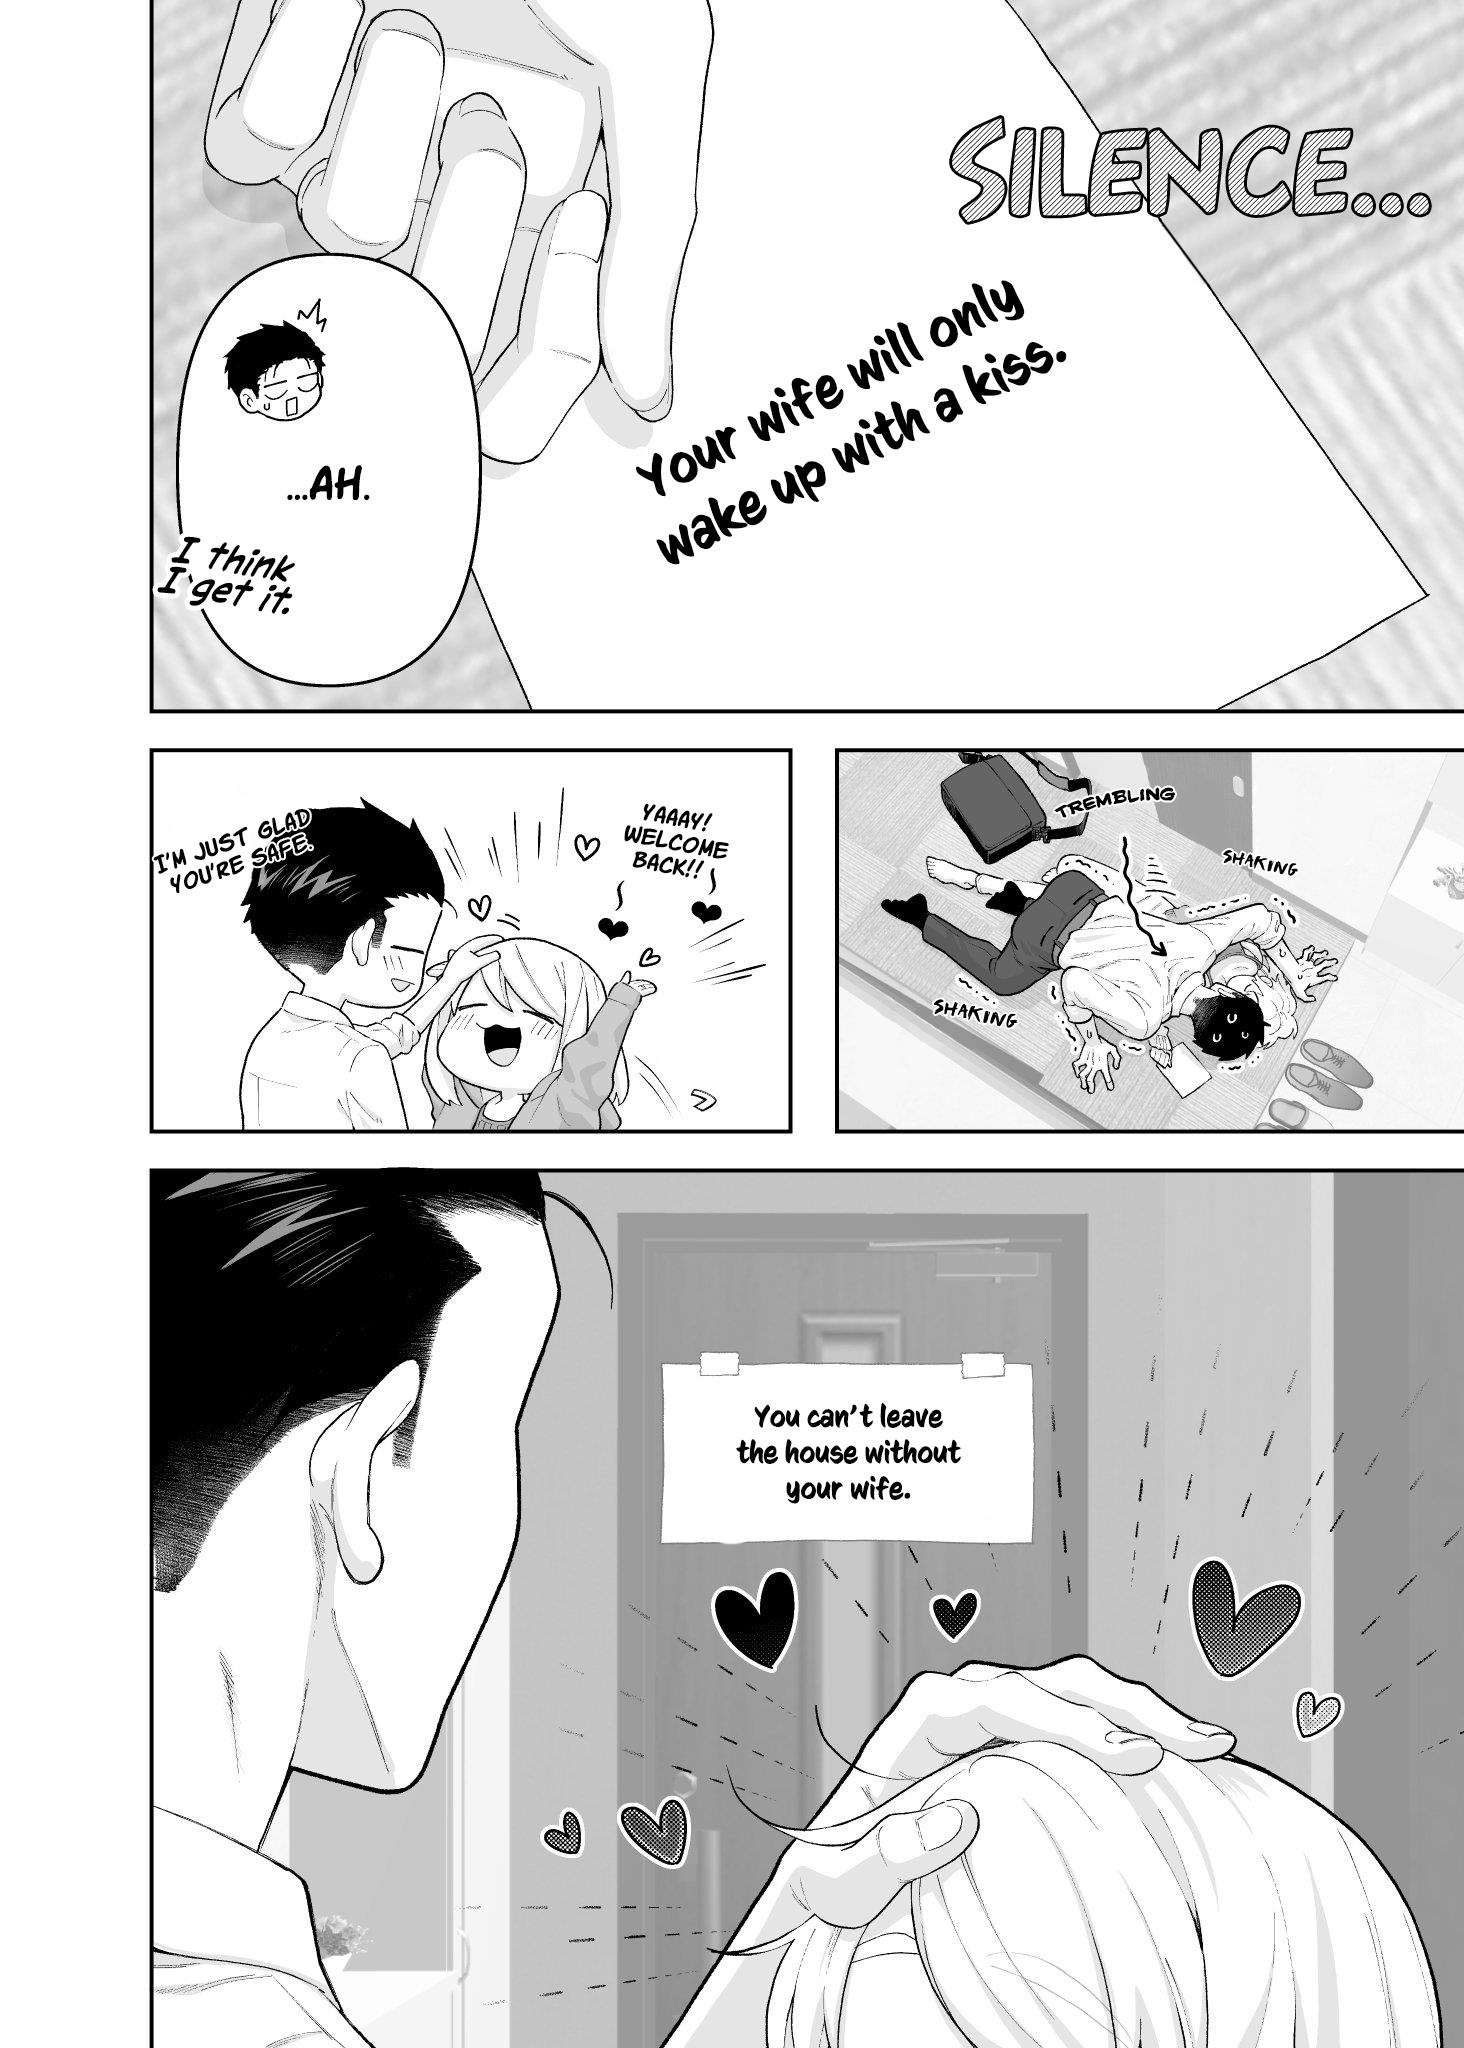 A Story About A Very Ordinary Couple - Page 2